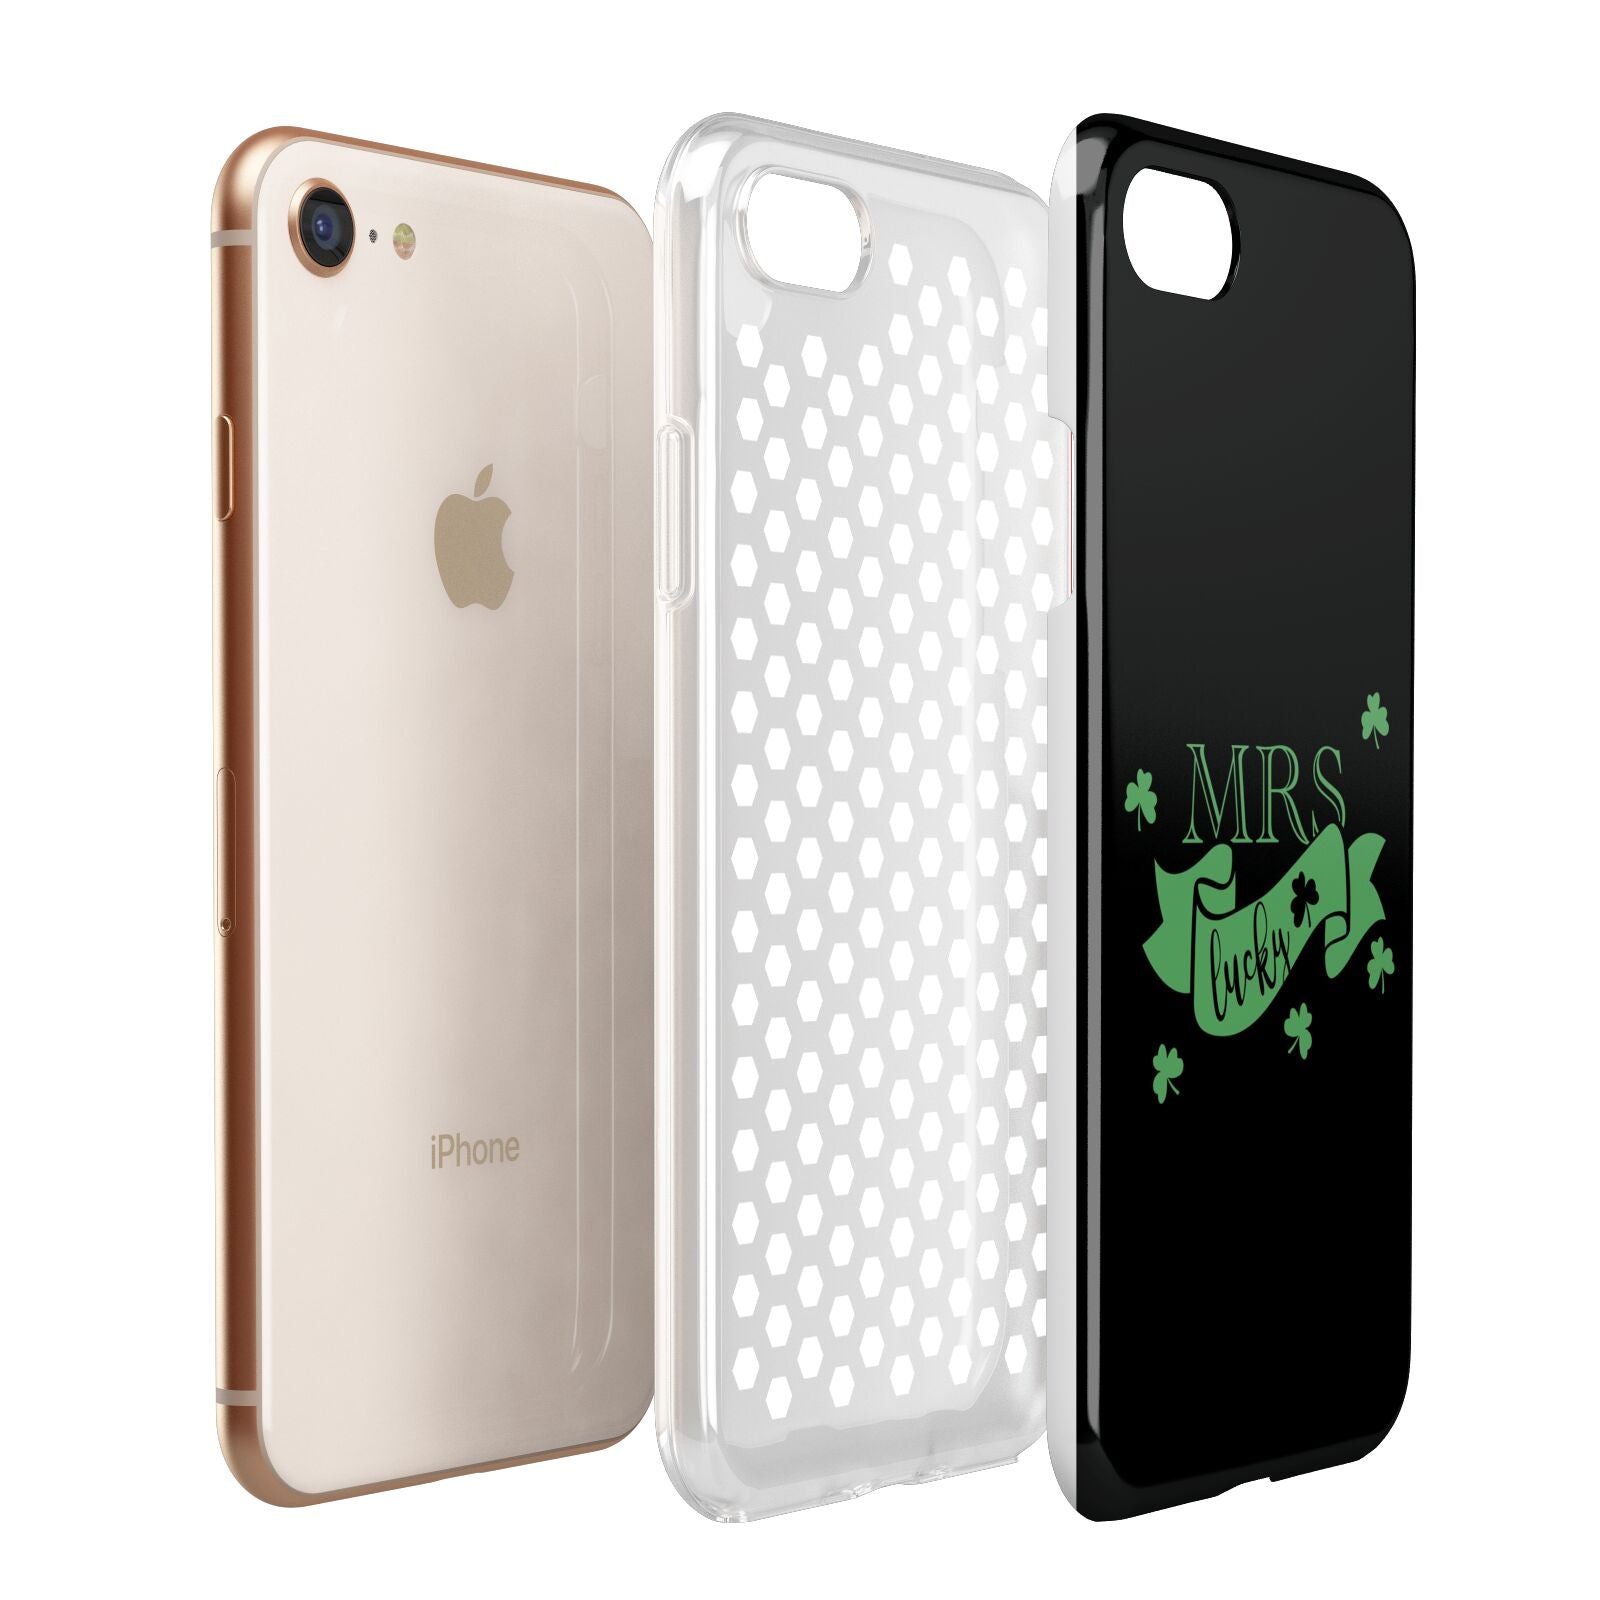 Mrs Lucky Apple iPhone 7 8 3D Tough Case Expanded View